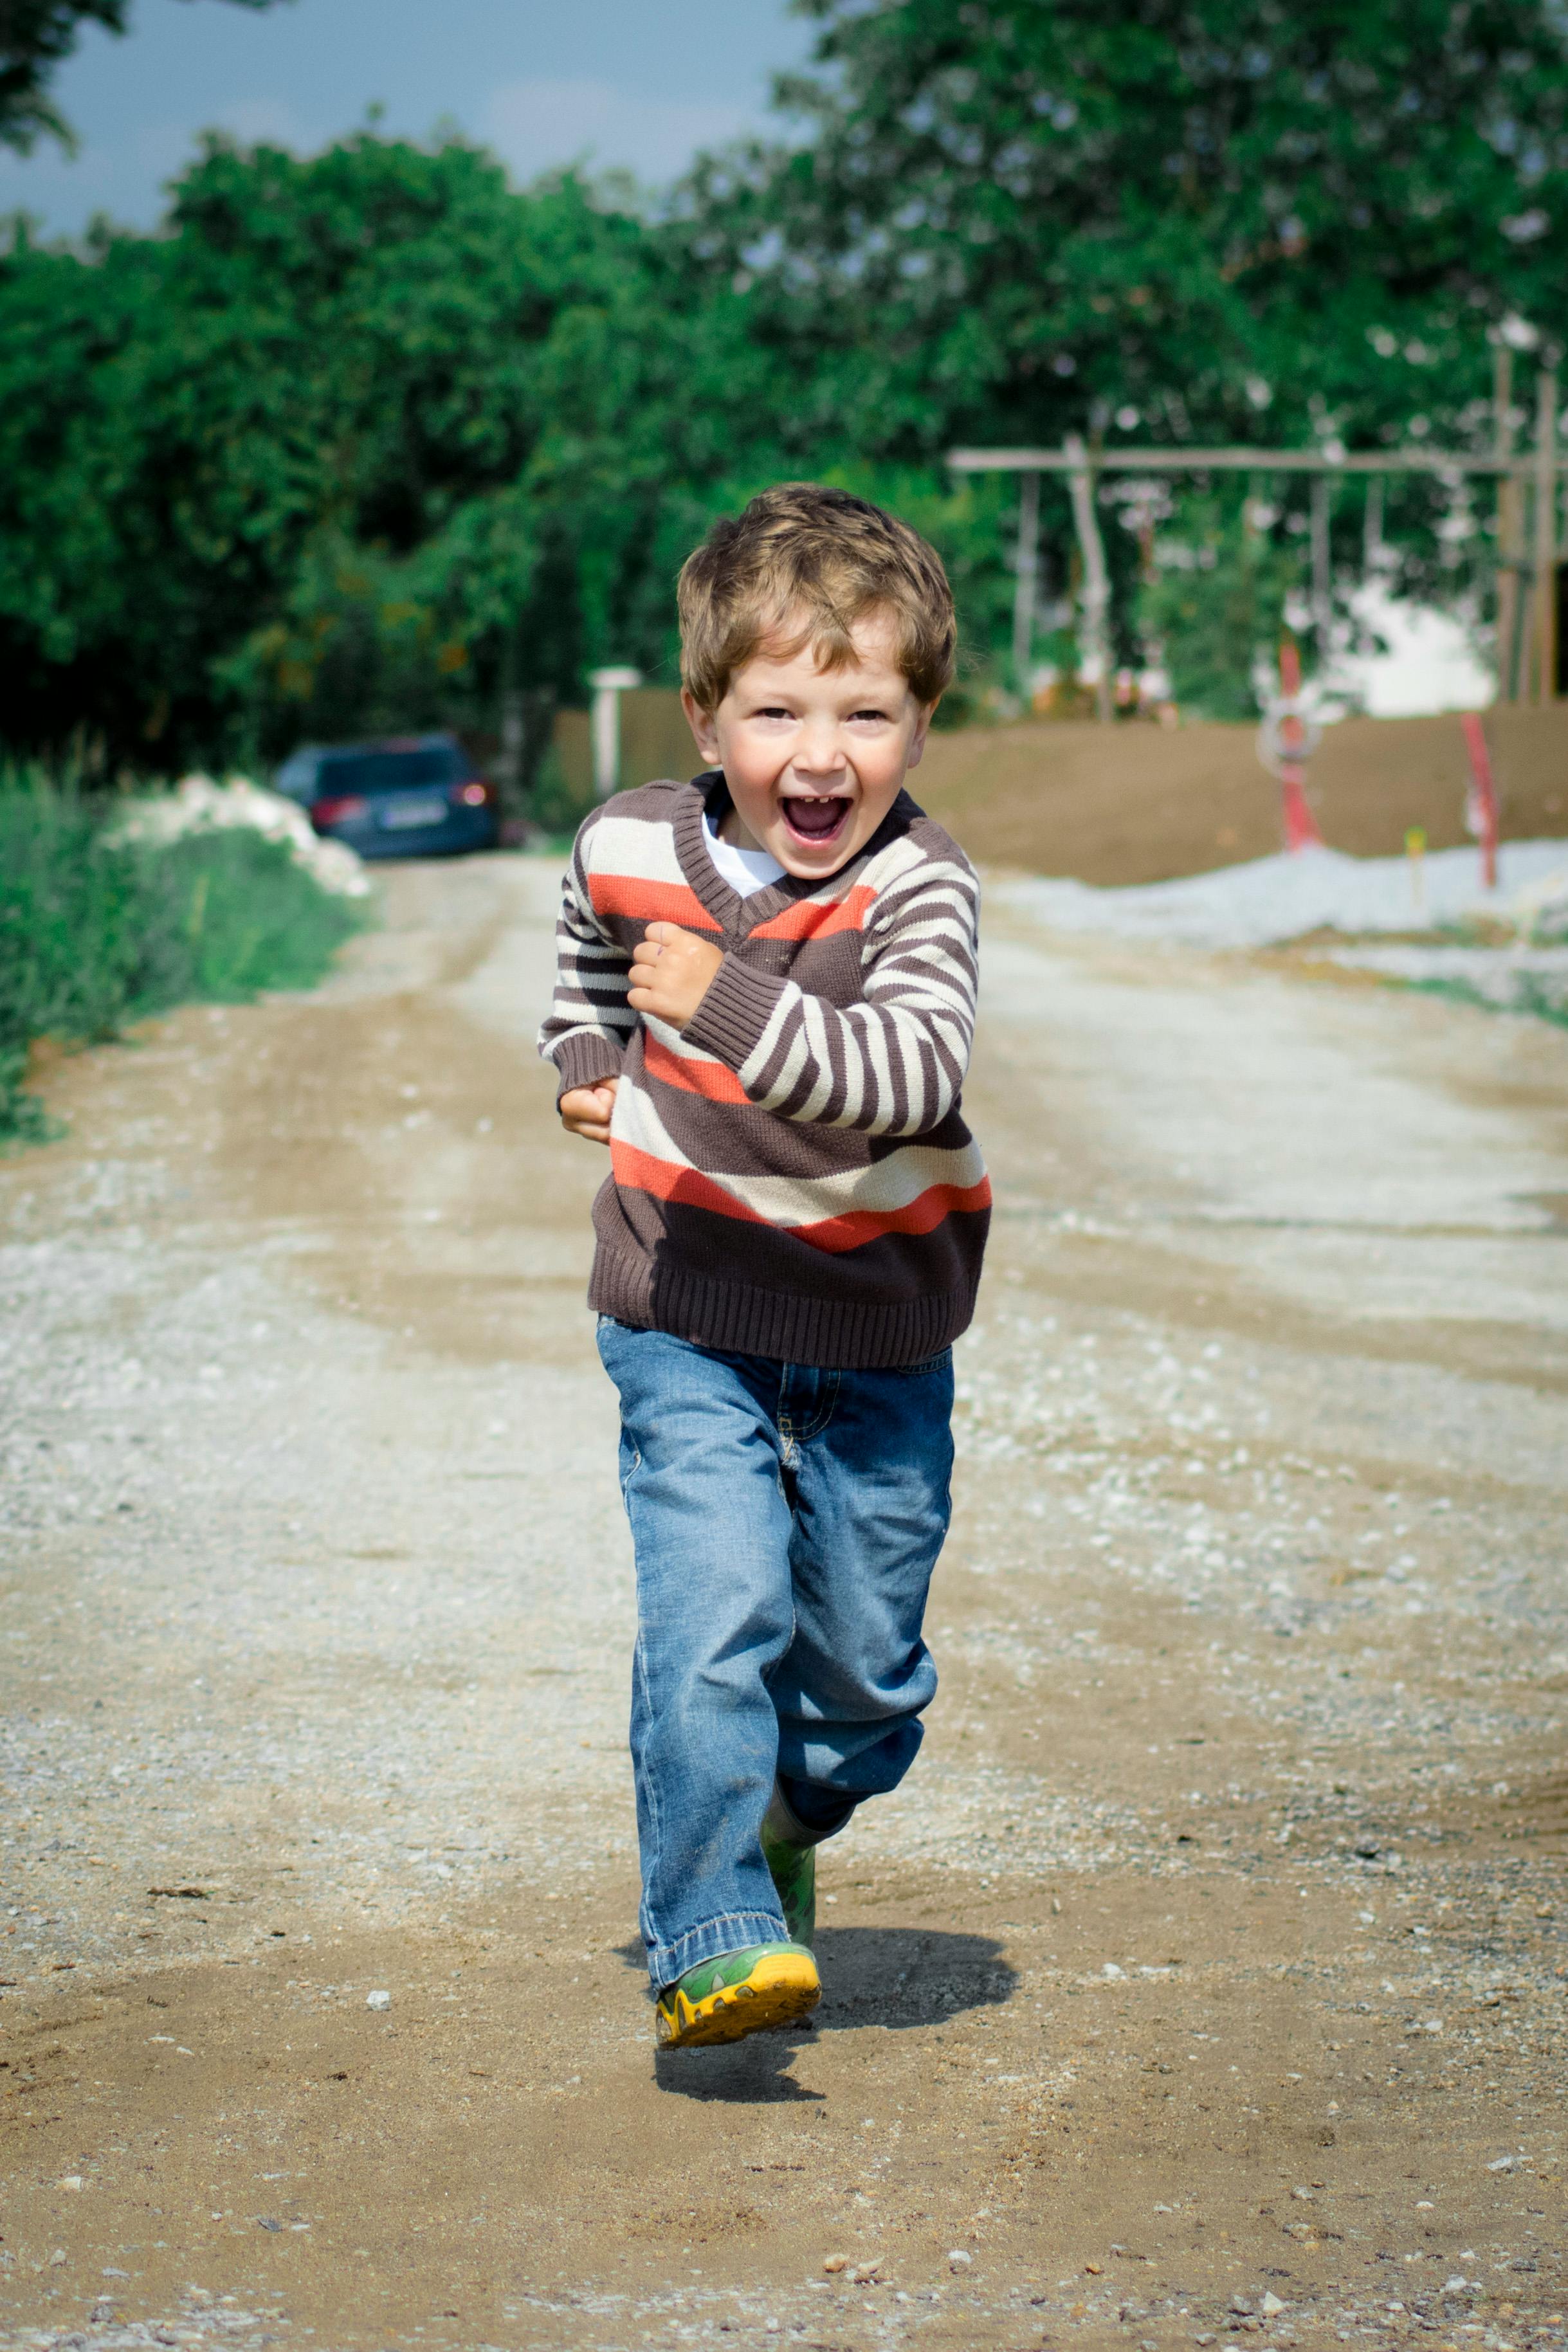 A young boy running | Source: Pexels